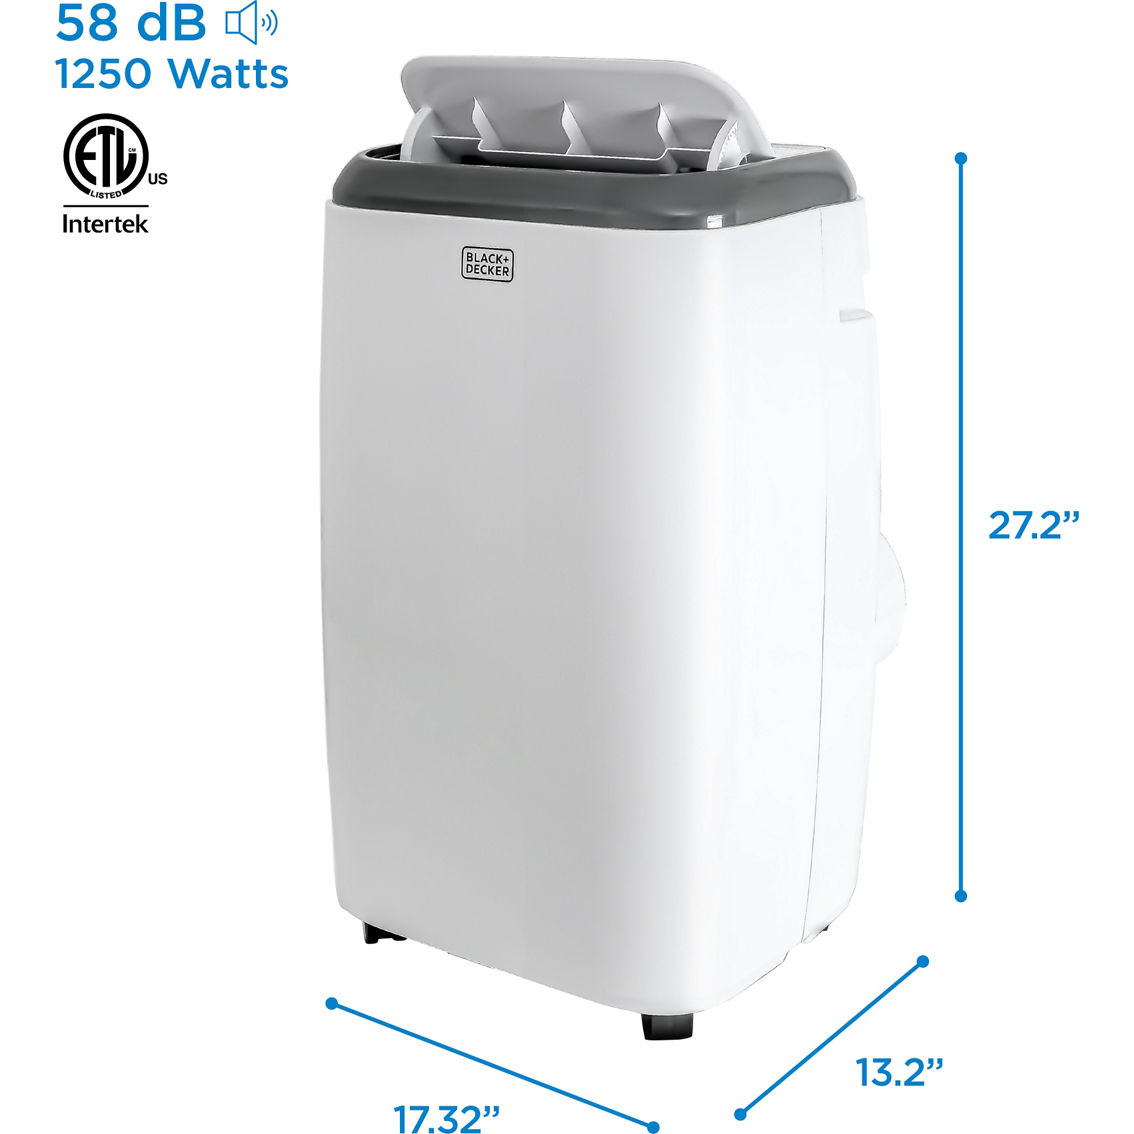 Black + Decker 10,000 BTU (SACC/CEC) Portable Air Conditioner with Heat and Remote - Image 2 of 7